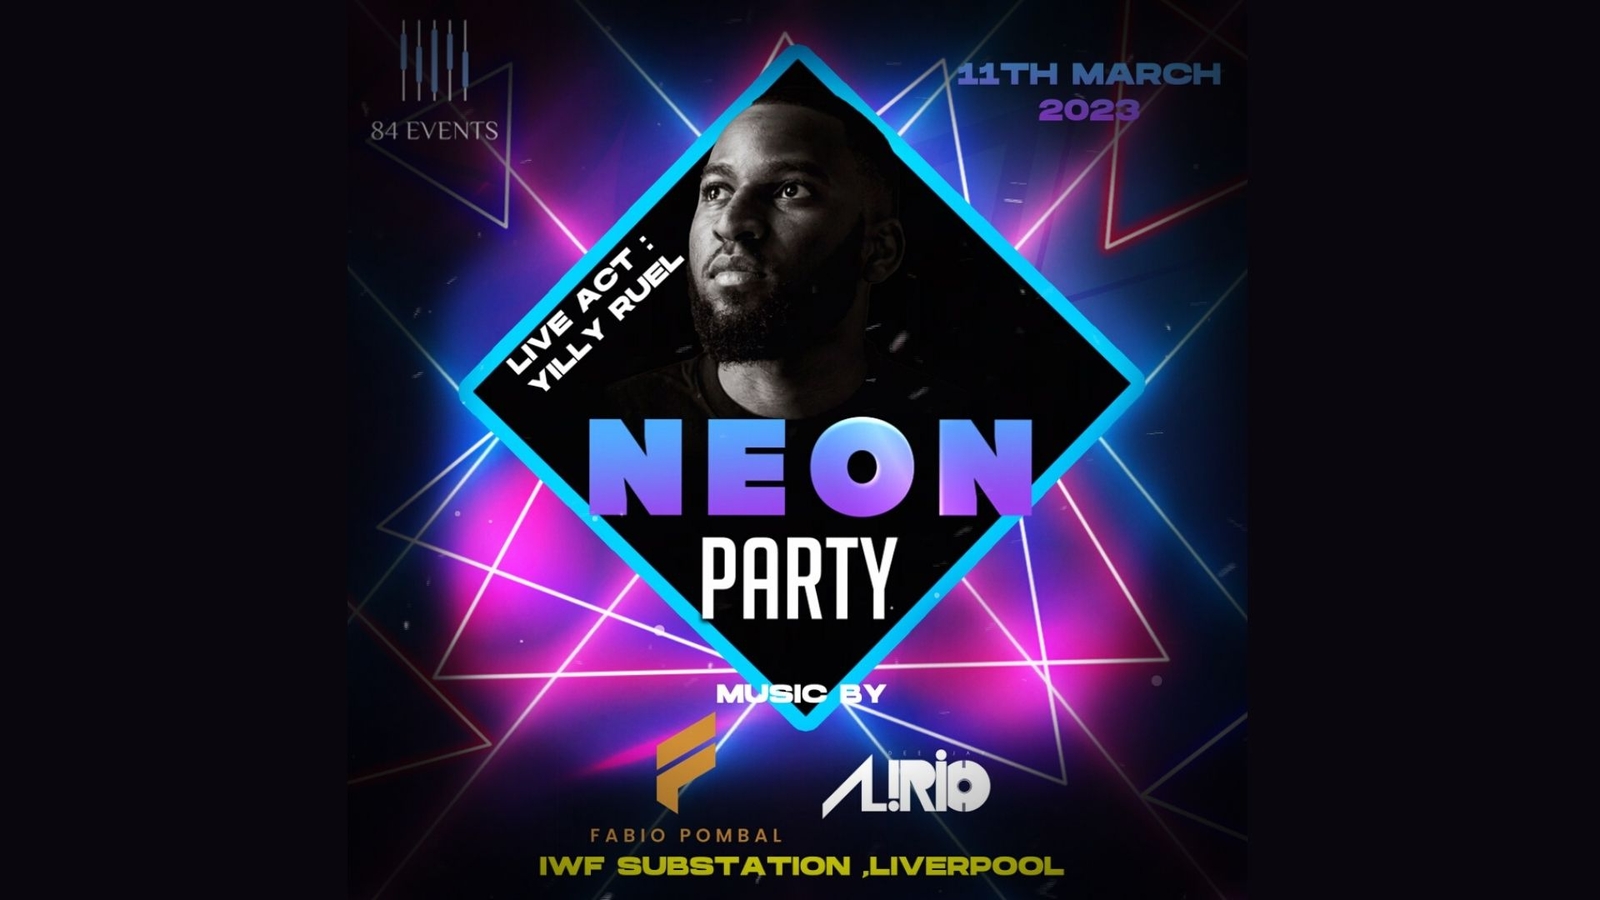 GLOW/NEON Party – UK Edition